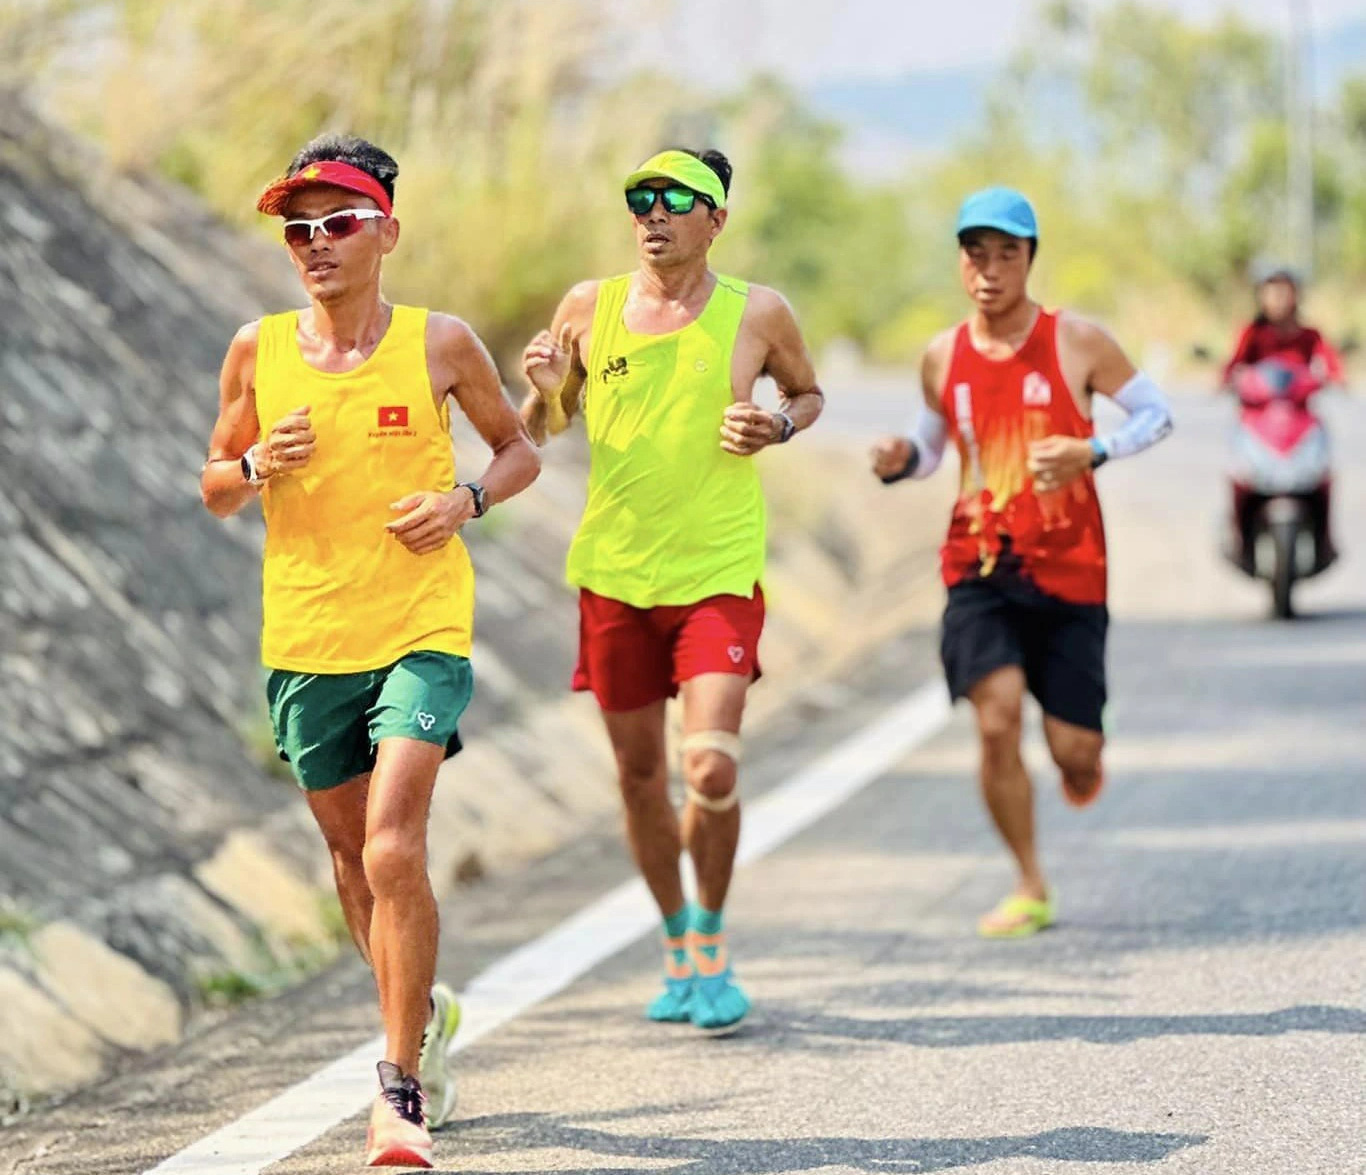 Retired Vietnamese runner concludes remarkable 1,800km run from Hanoi to Ho Chi Minh City